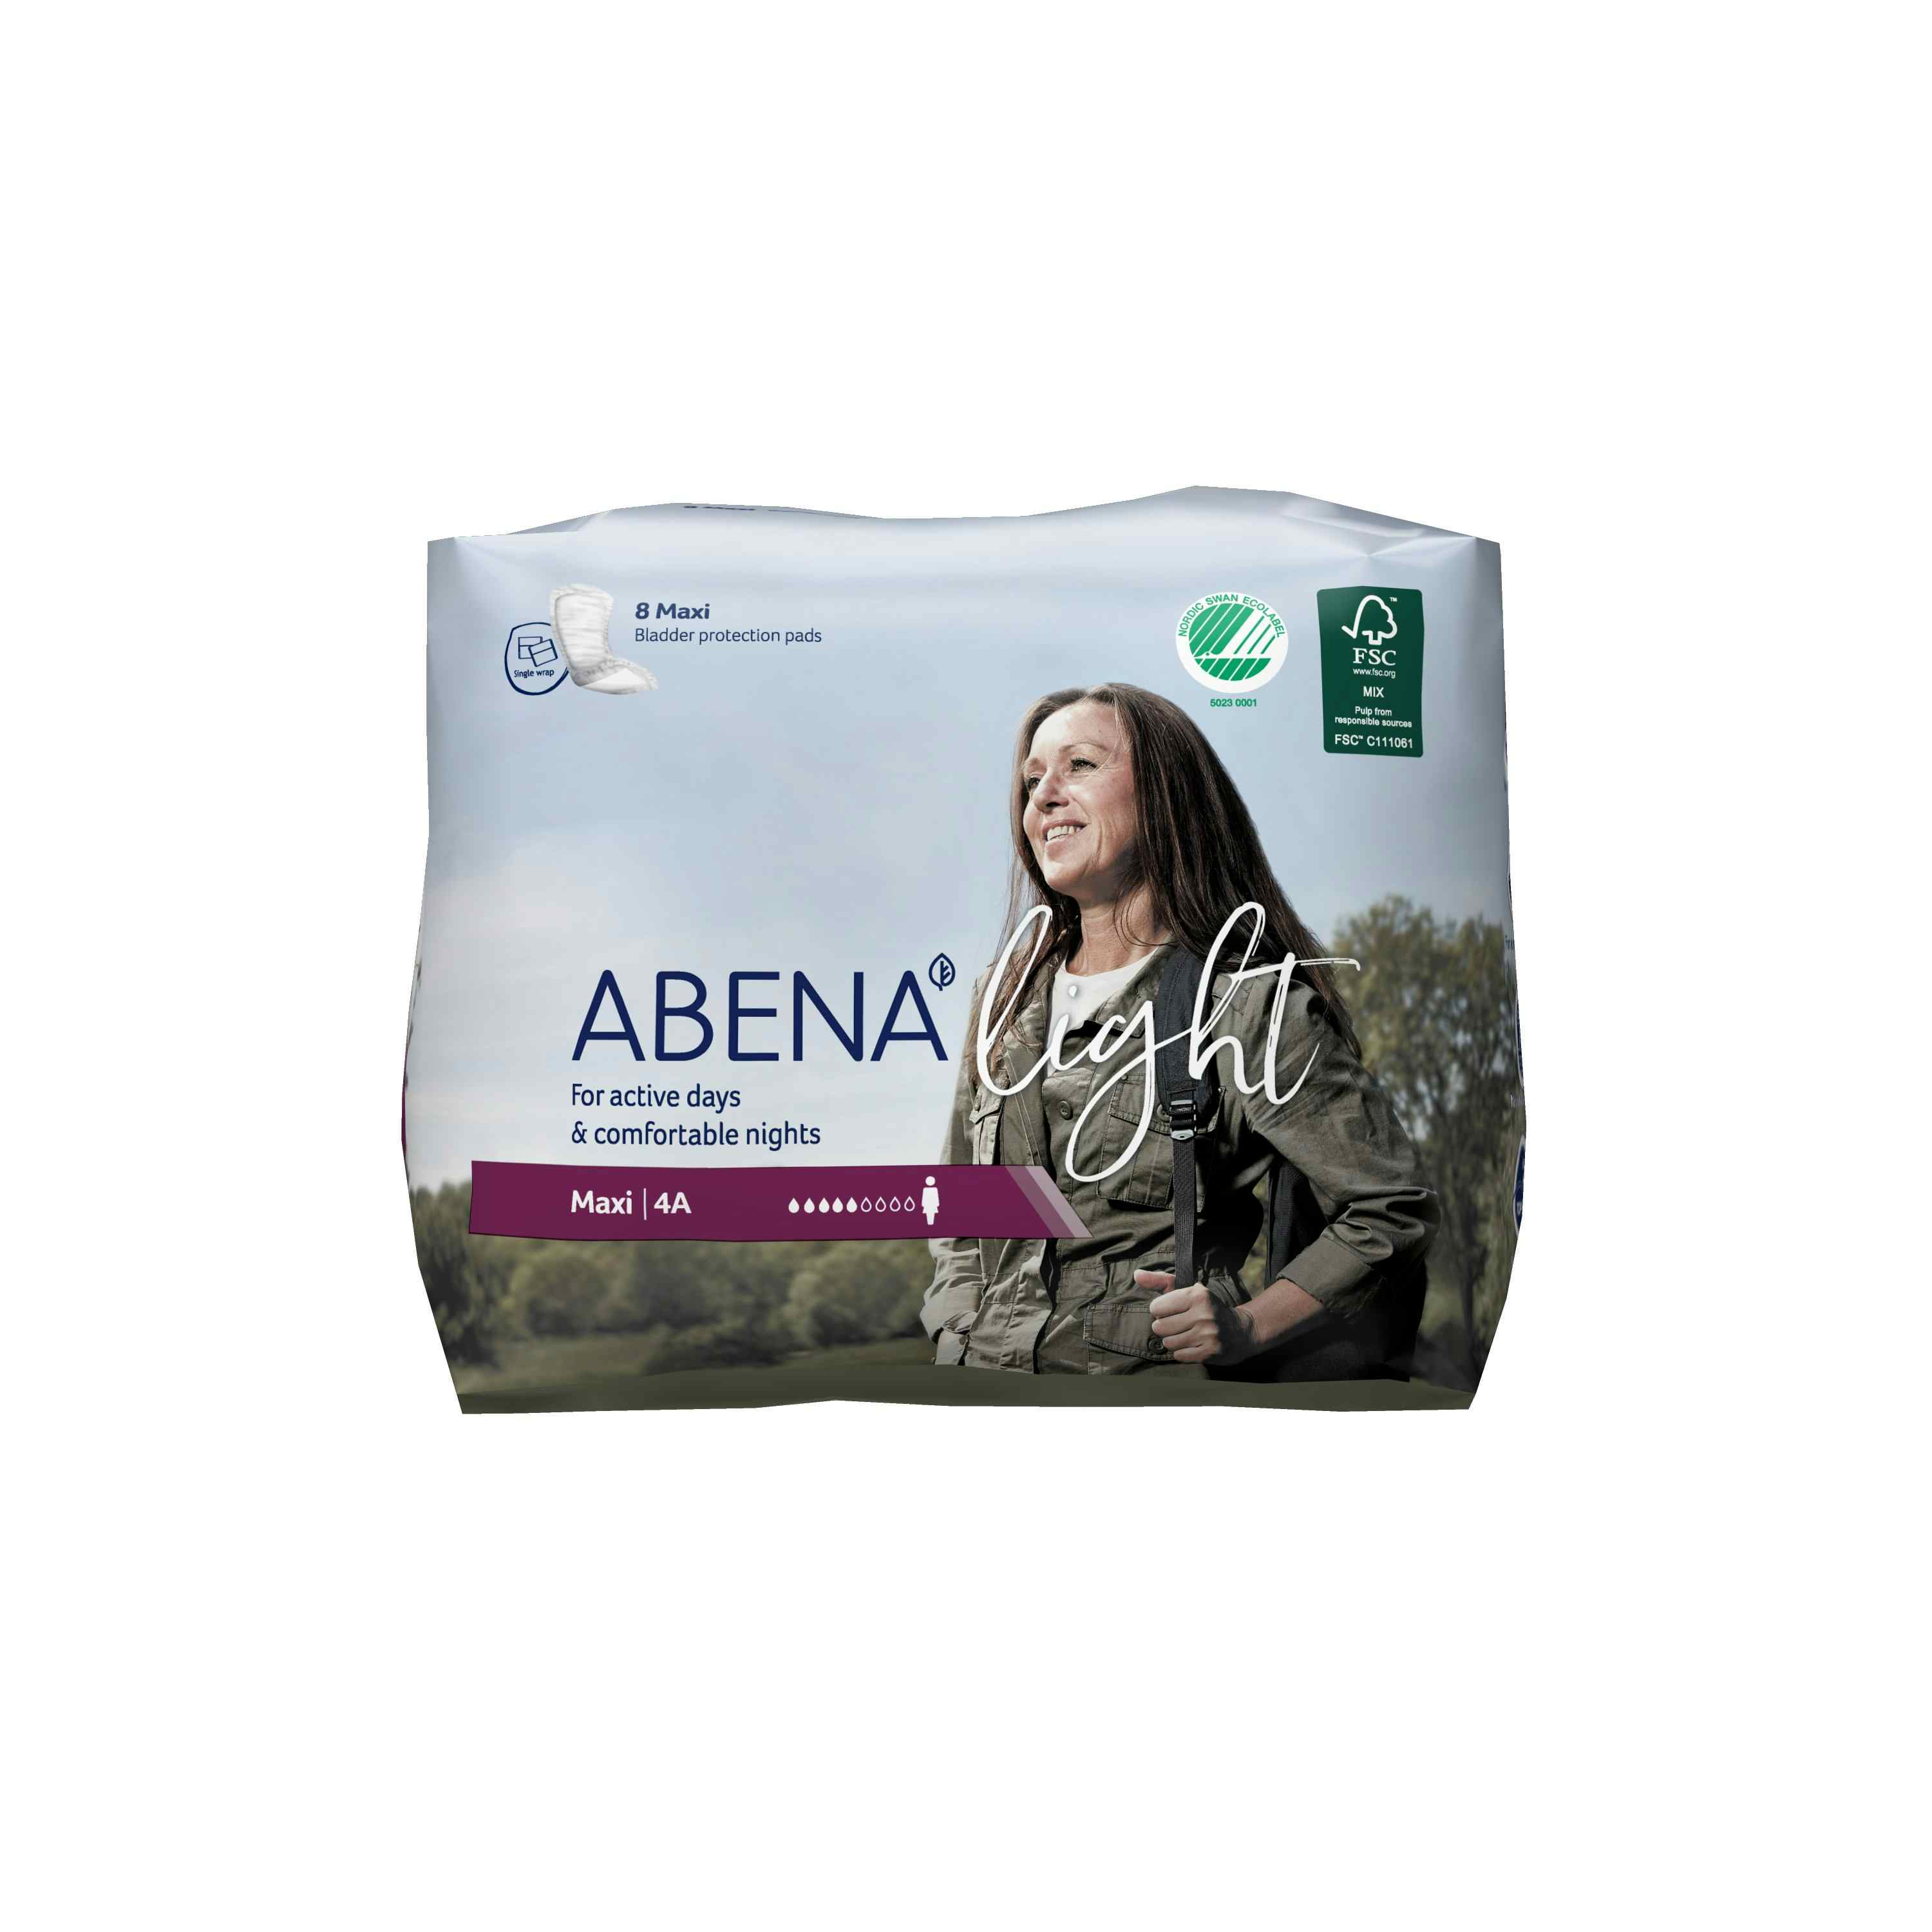 Abena Light Maxi Disposable Unisex Adult Bladder Control Pad, Moderate Absorbency, 1000005437, One Size Fits Most -  Bag of 8